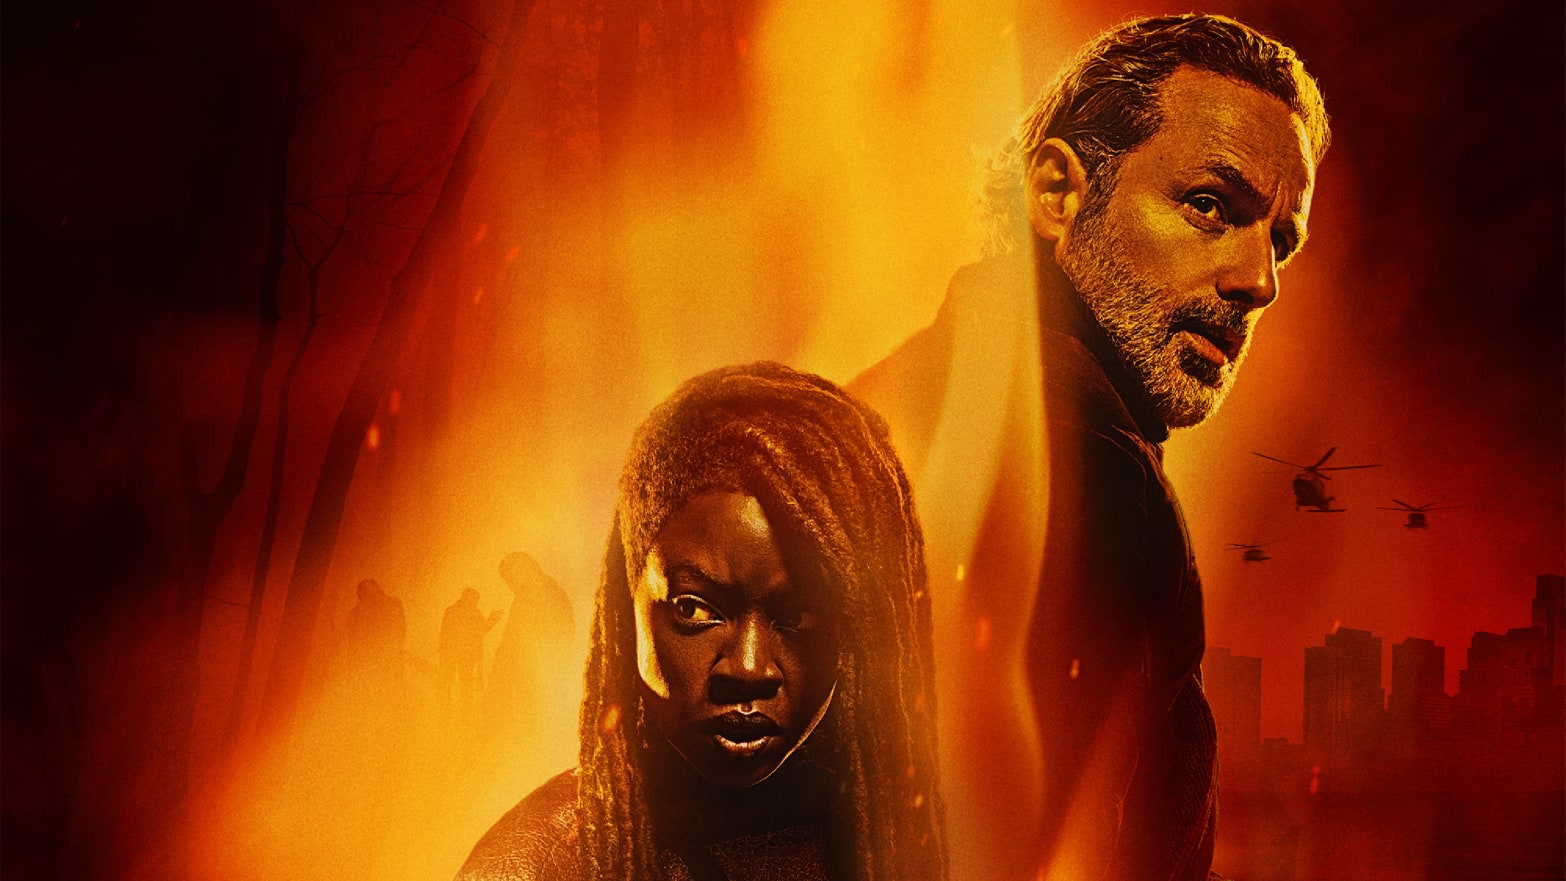 Rick and Michonne's Return to 'The Walking Dead' Is an Epic Love Story